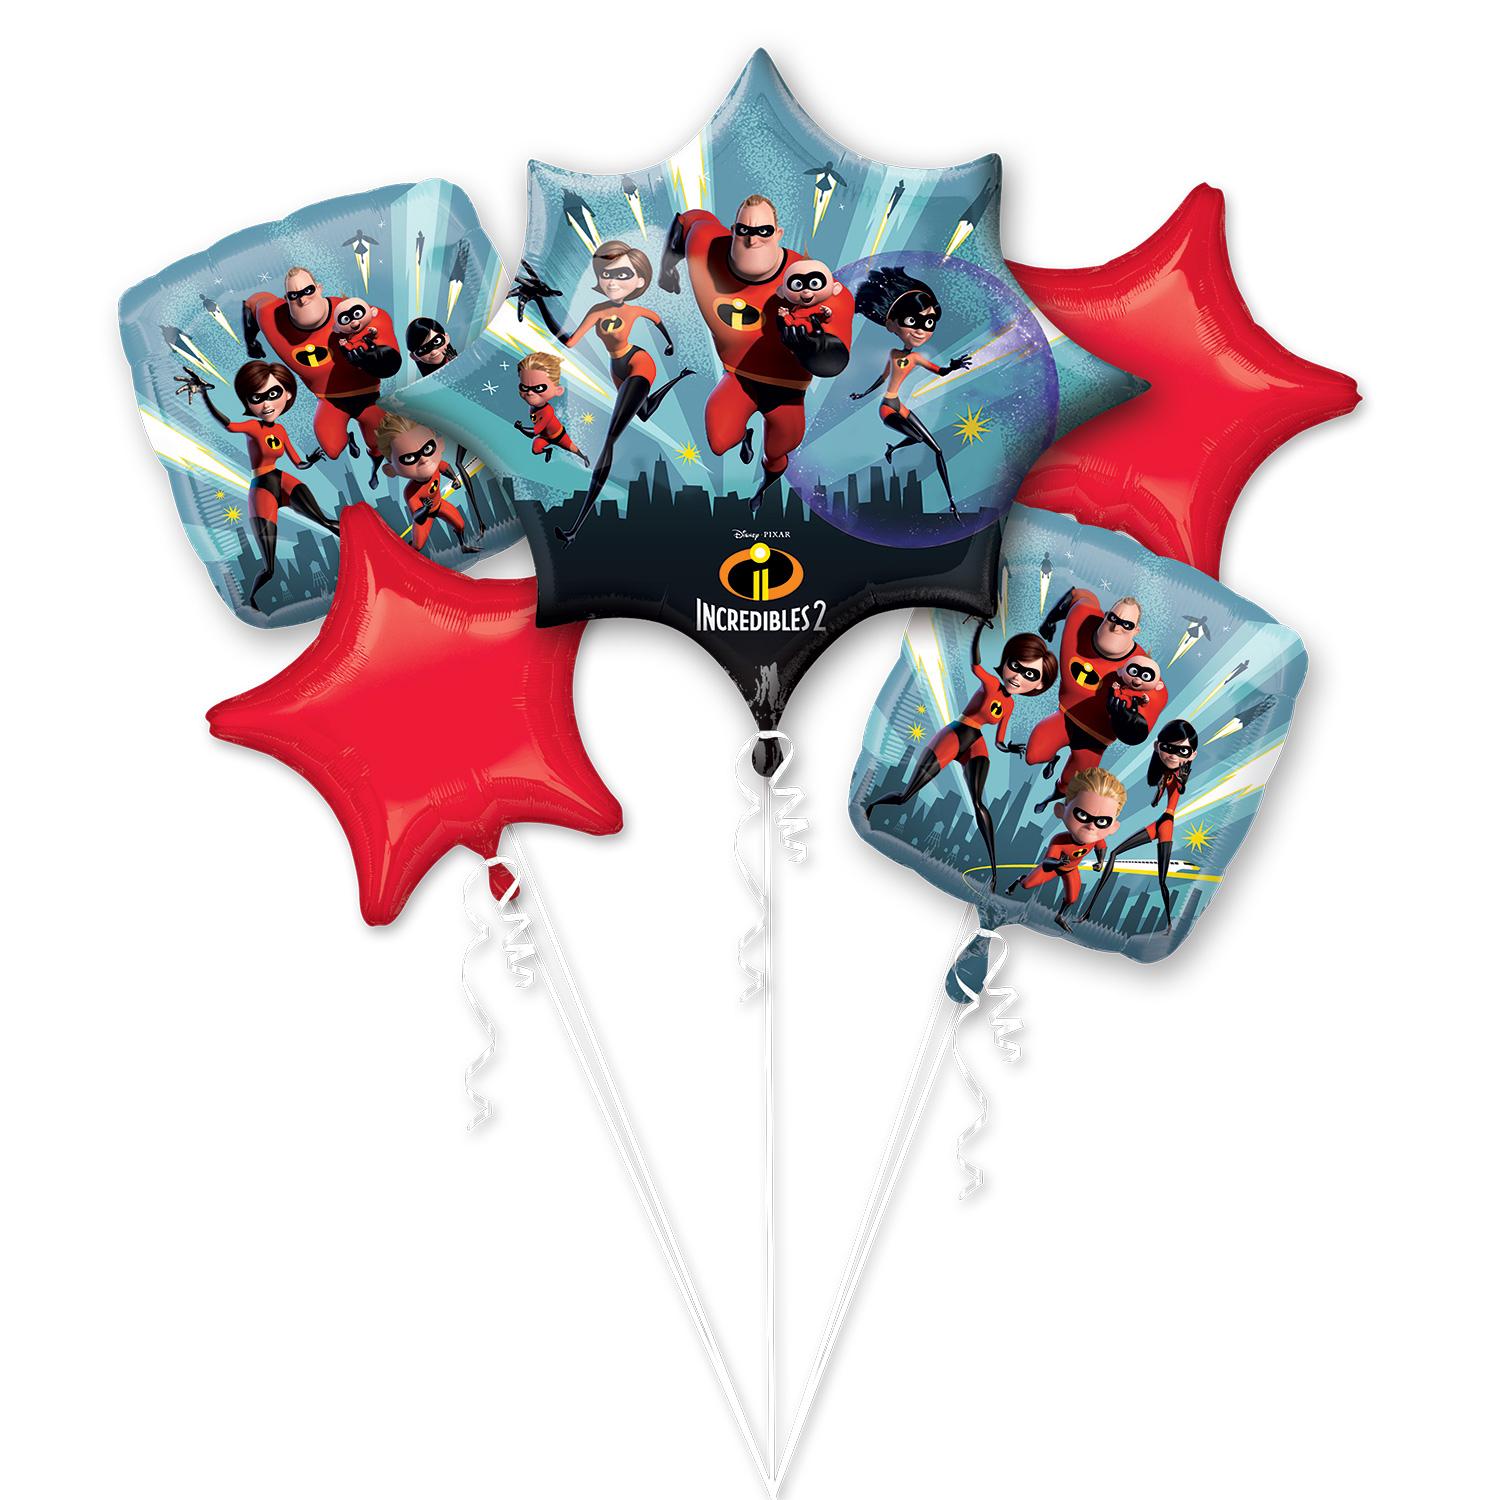 The Incredibles 2 Balloon Bouquet 5pcs Balloons & Streamers - Party Centre